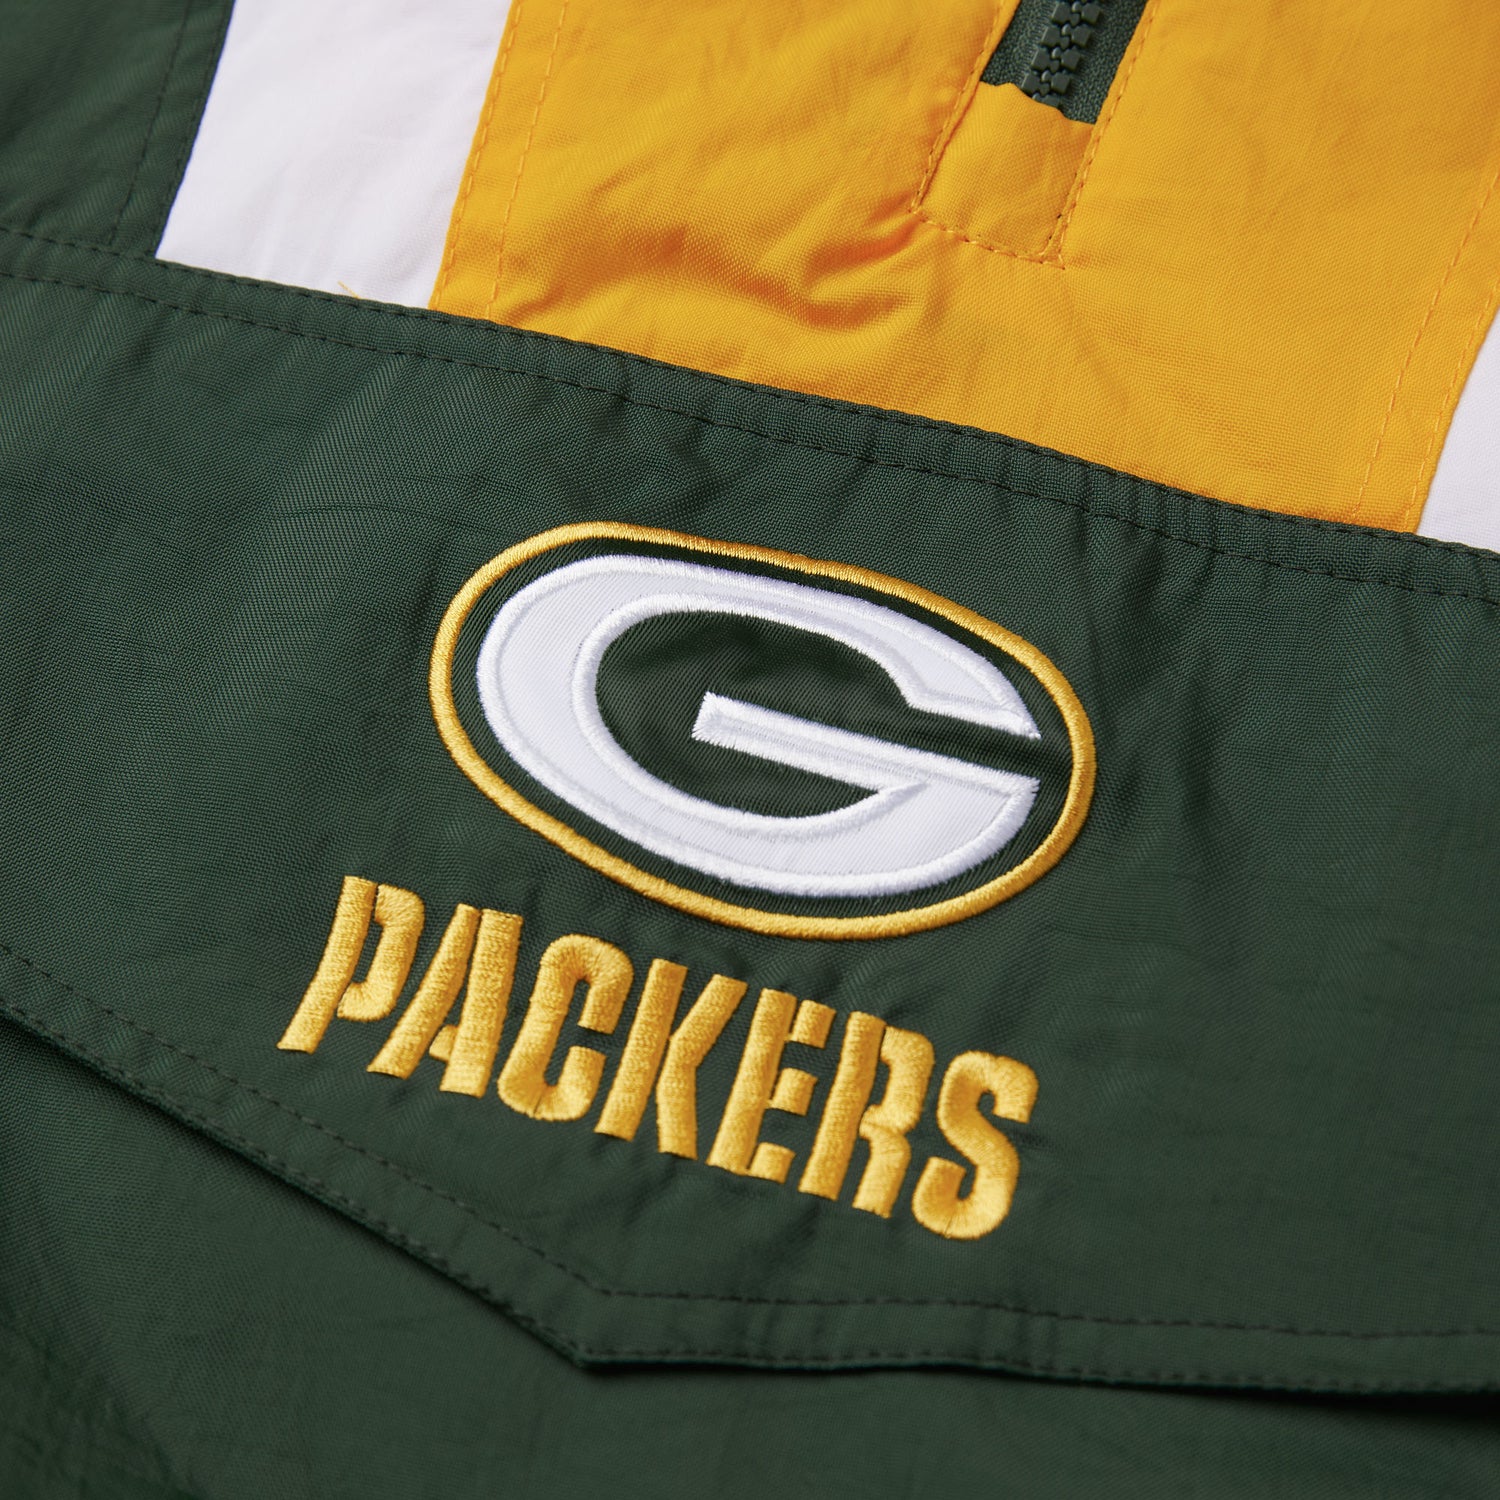 Green Bay Packers Jacket, Packers Pullover, Green Bay Packers